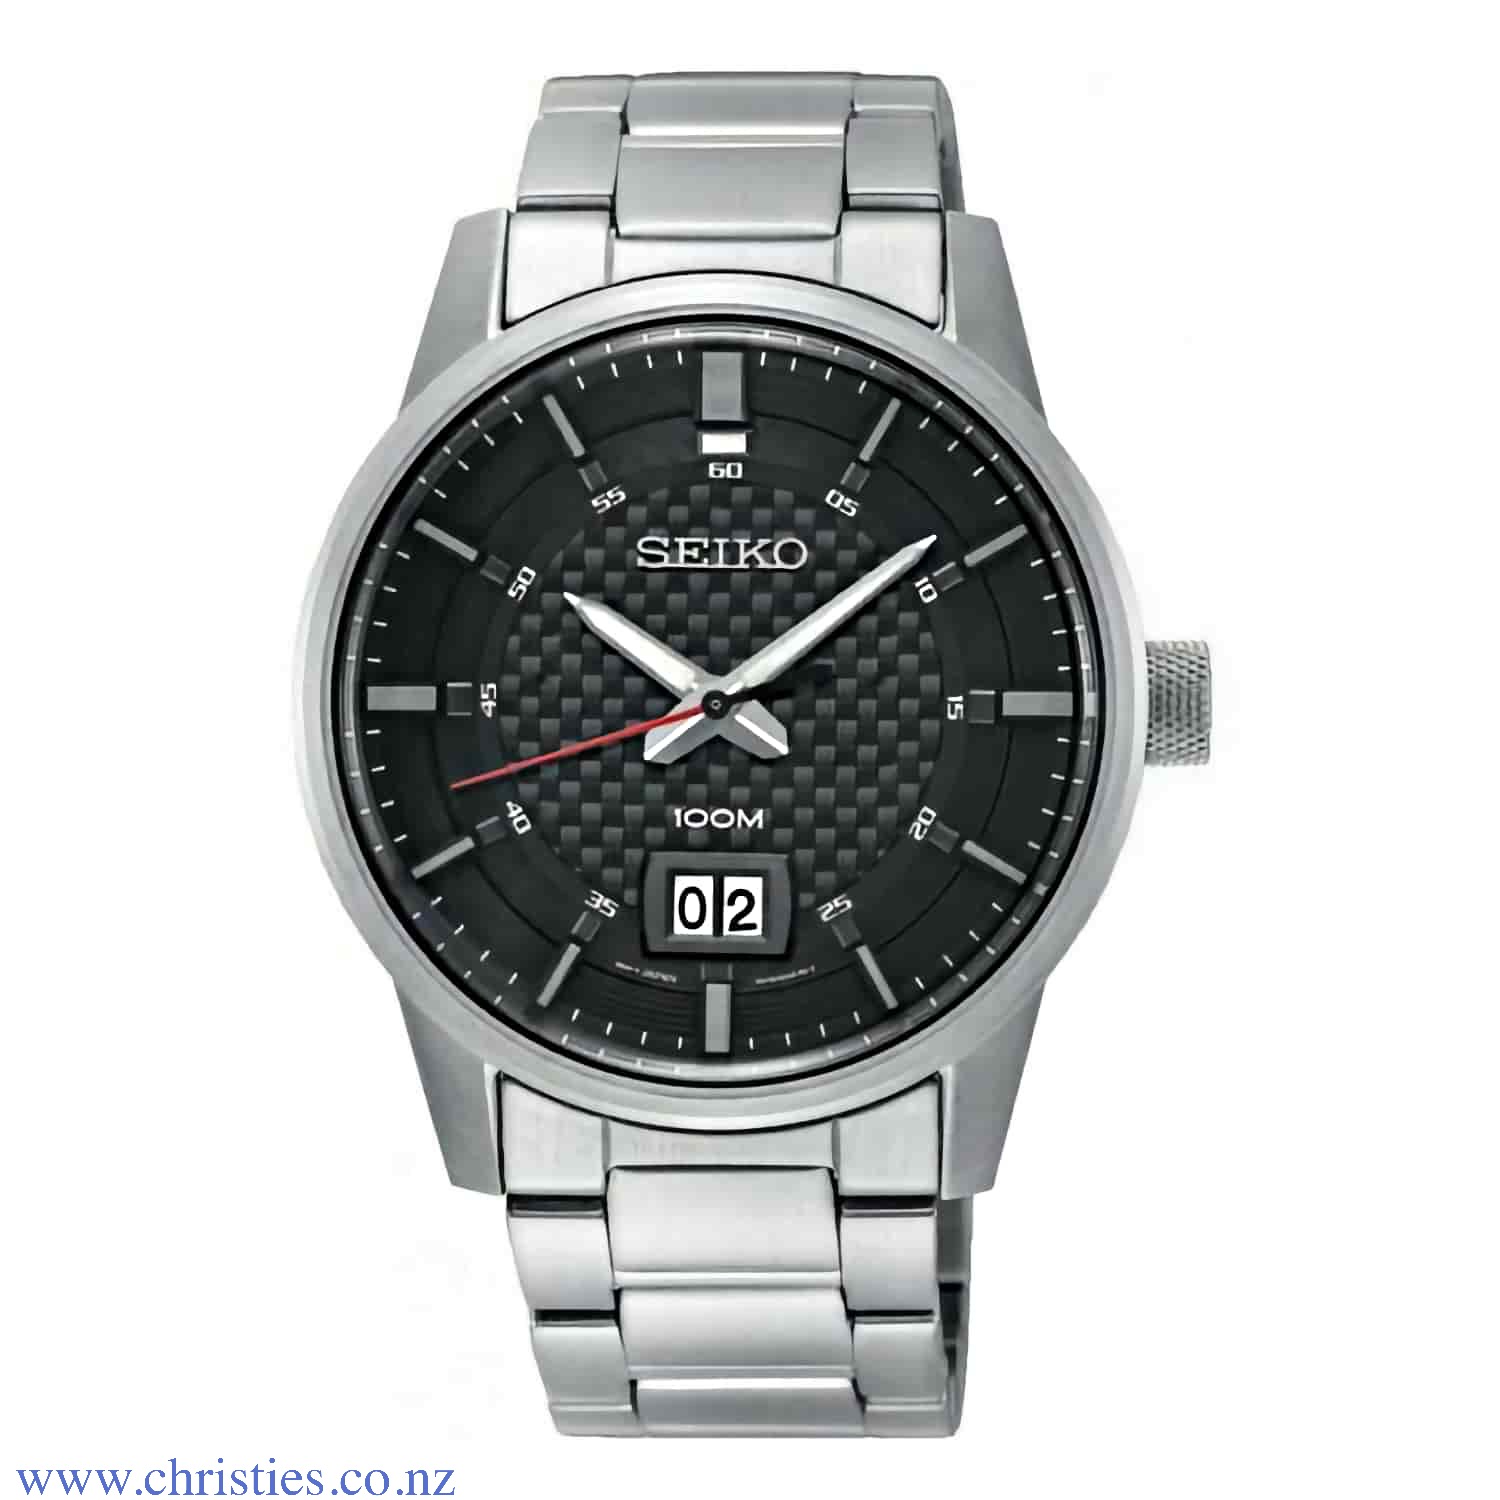 SUR269P1 Seiko 100m stainless Steel Watch. SUR269P1 Seiko 100m stainless Steel Watchh rated at 100 metres water resist and featuring a carbon fibre dial Afterpay - Split your purchase into 4 instalments - Pay for your purchase over 4 instalments, due eve 